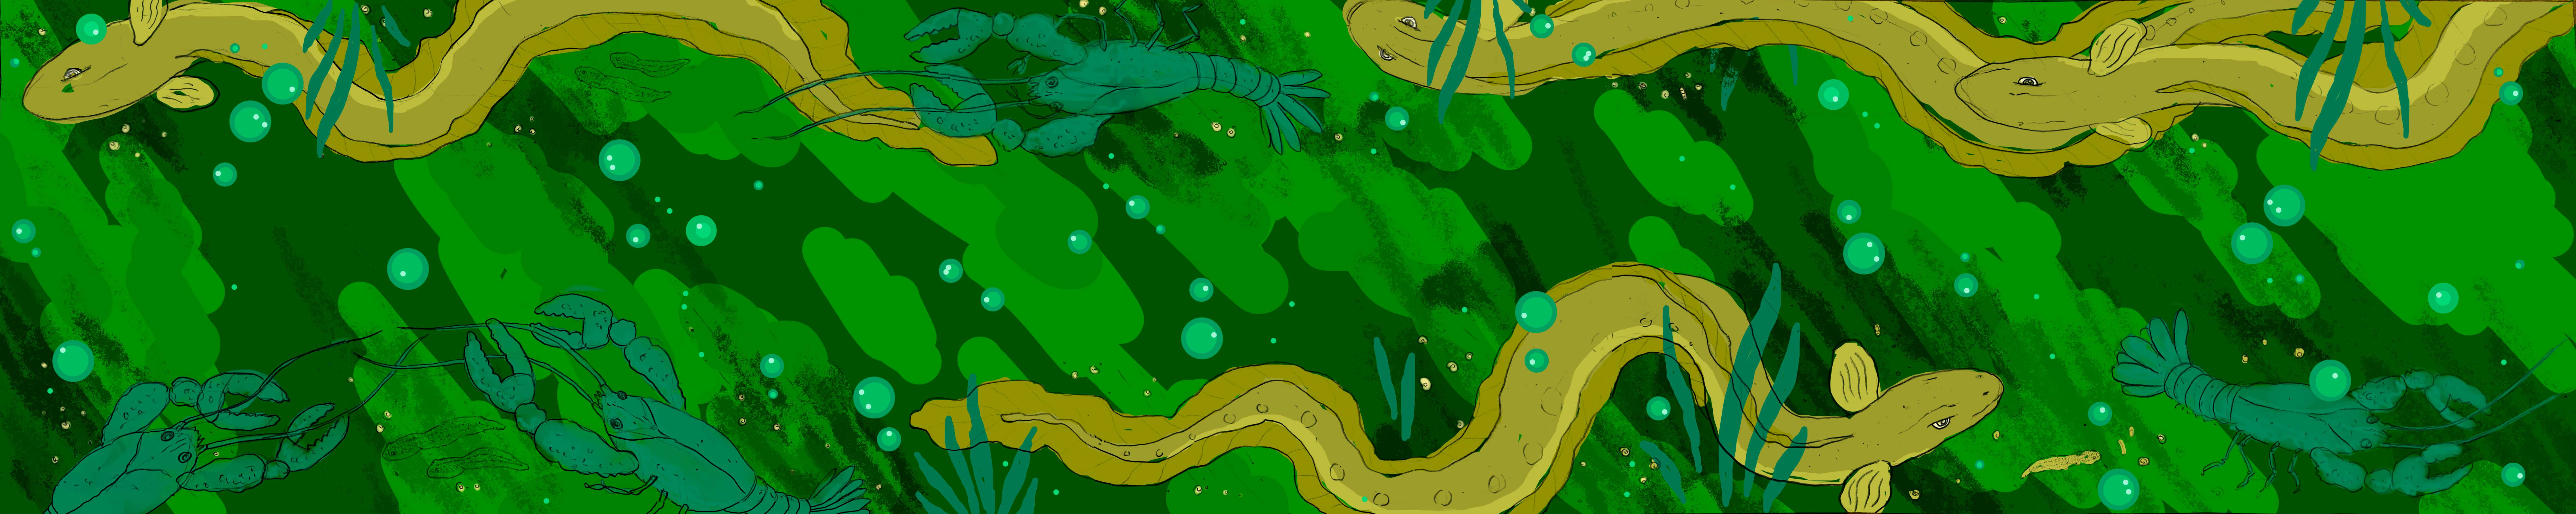 a green and yellow painting of fish and lobsters in water